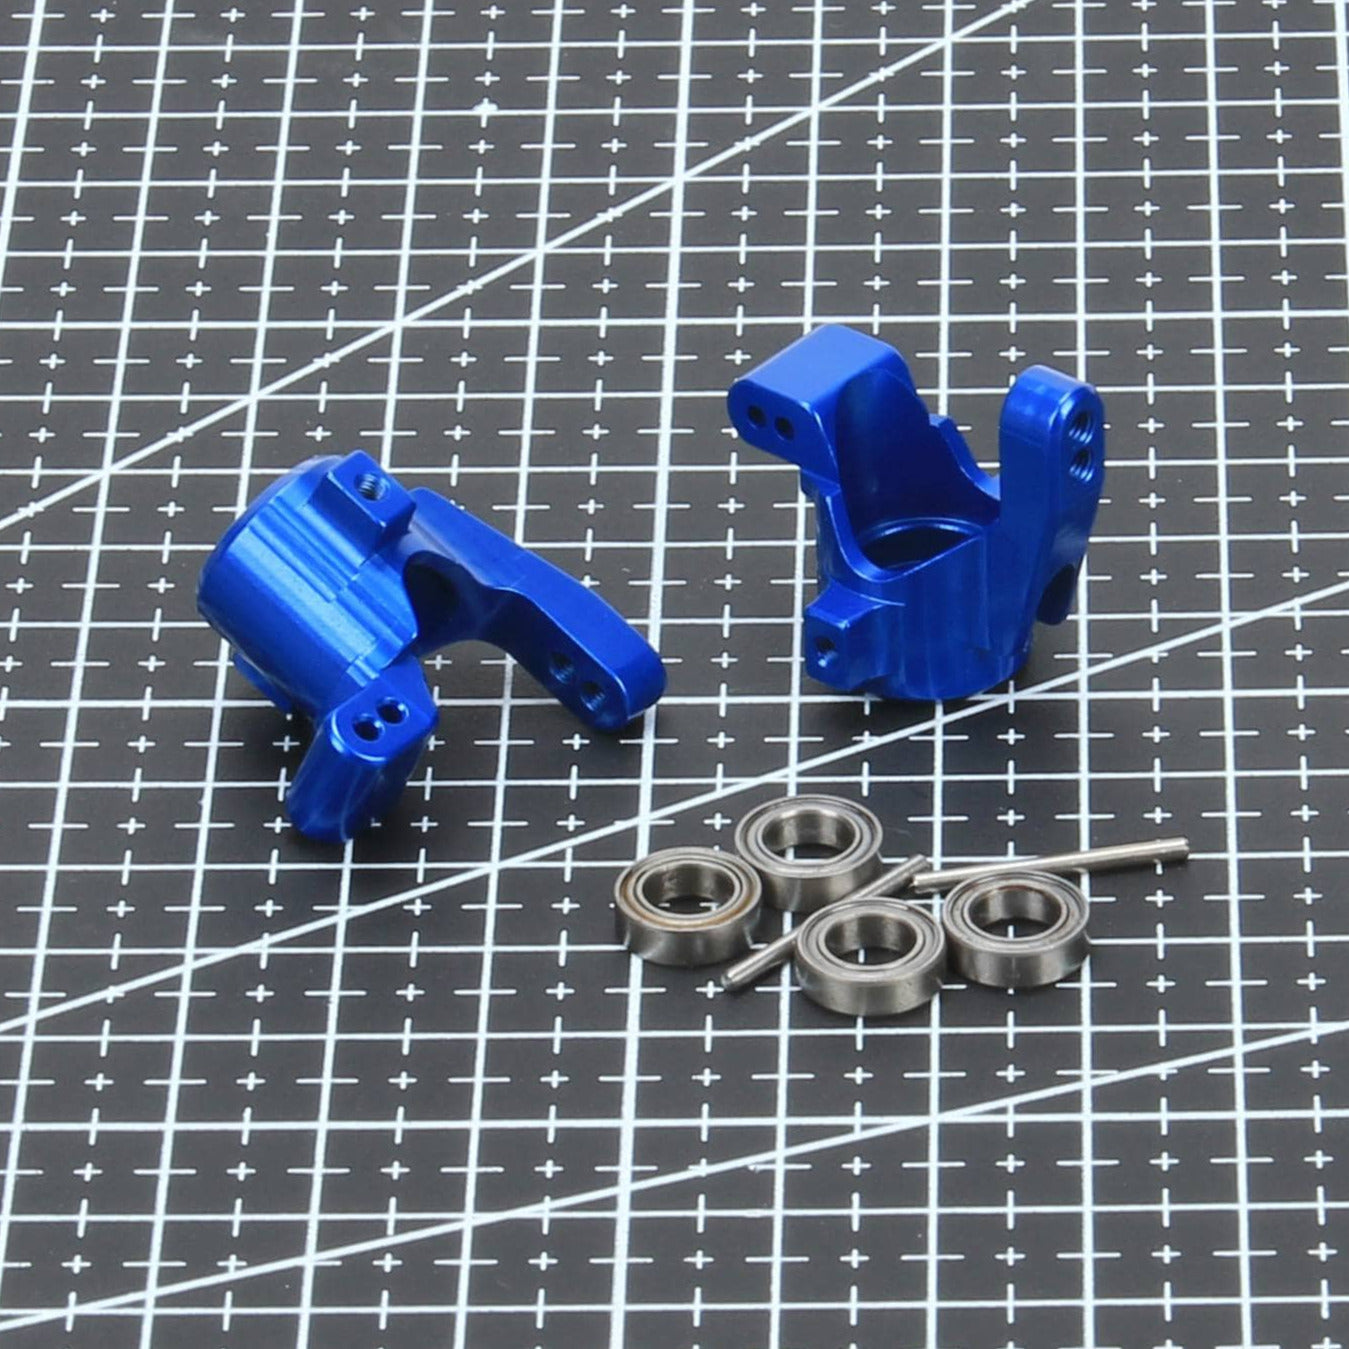 RCAWD TRAXXAS SLASH Blue RCAWD RC Aluminum Carriers Stub Axle 2pcs for 1/18 Traxxas Upgrade Parts